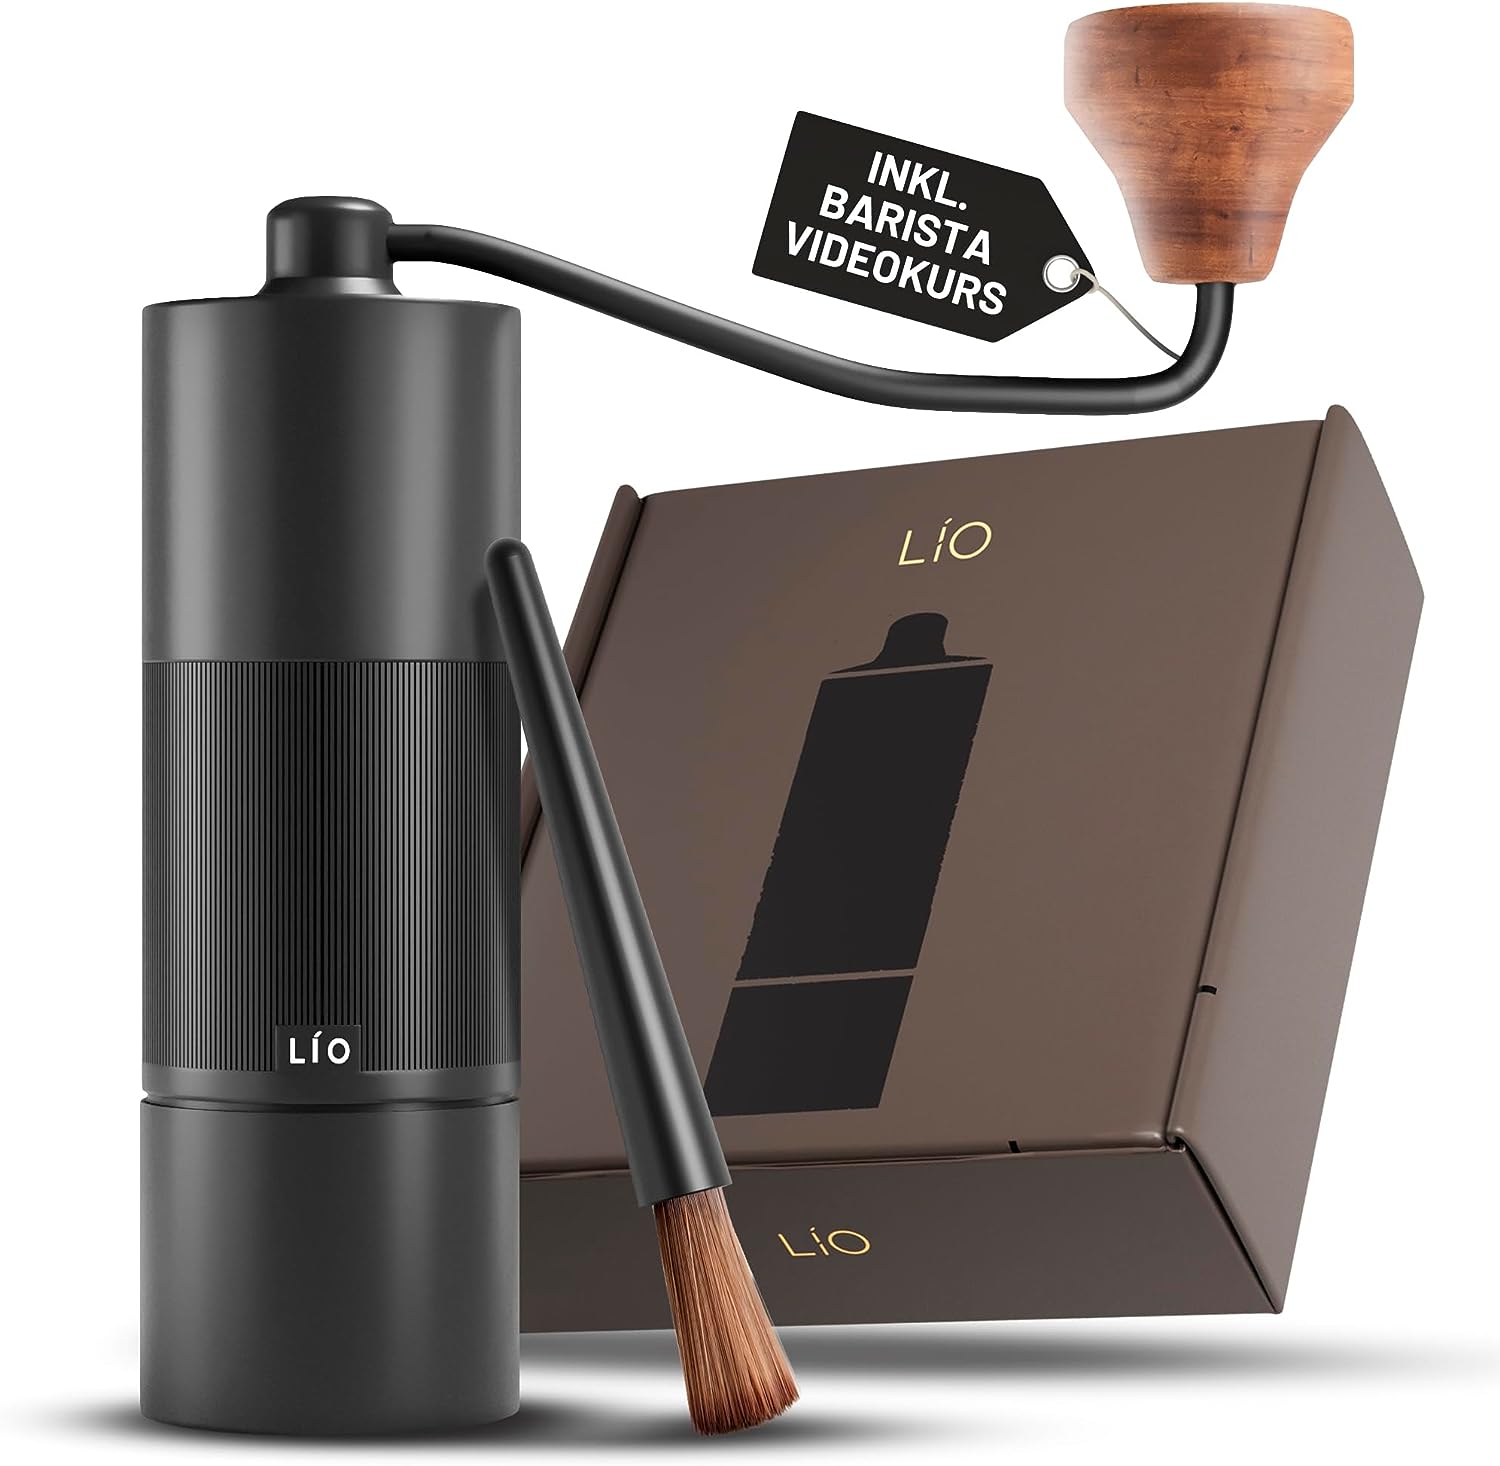 LÍO® - ONE Manual Coffee Grinder | Hand Coffee Grinder with Stainless Steel Grinder | Plastic-Free Aluminium and Stainless Steel with Walnut Wood Handle | French Press Espresso | Includes Video